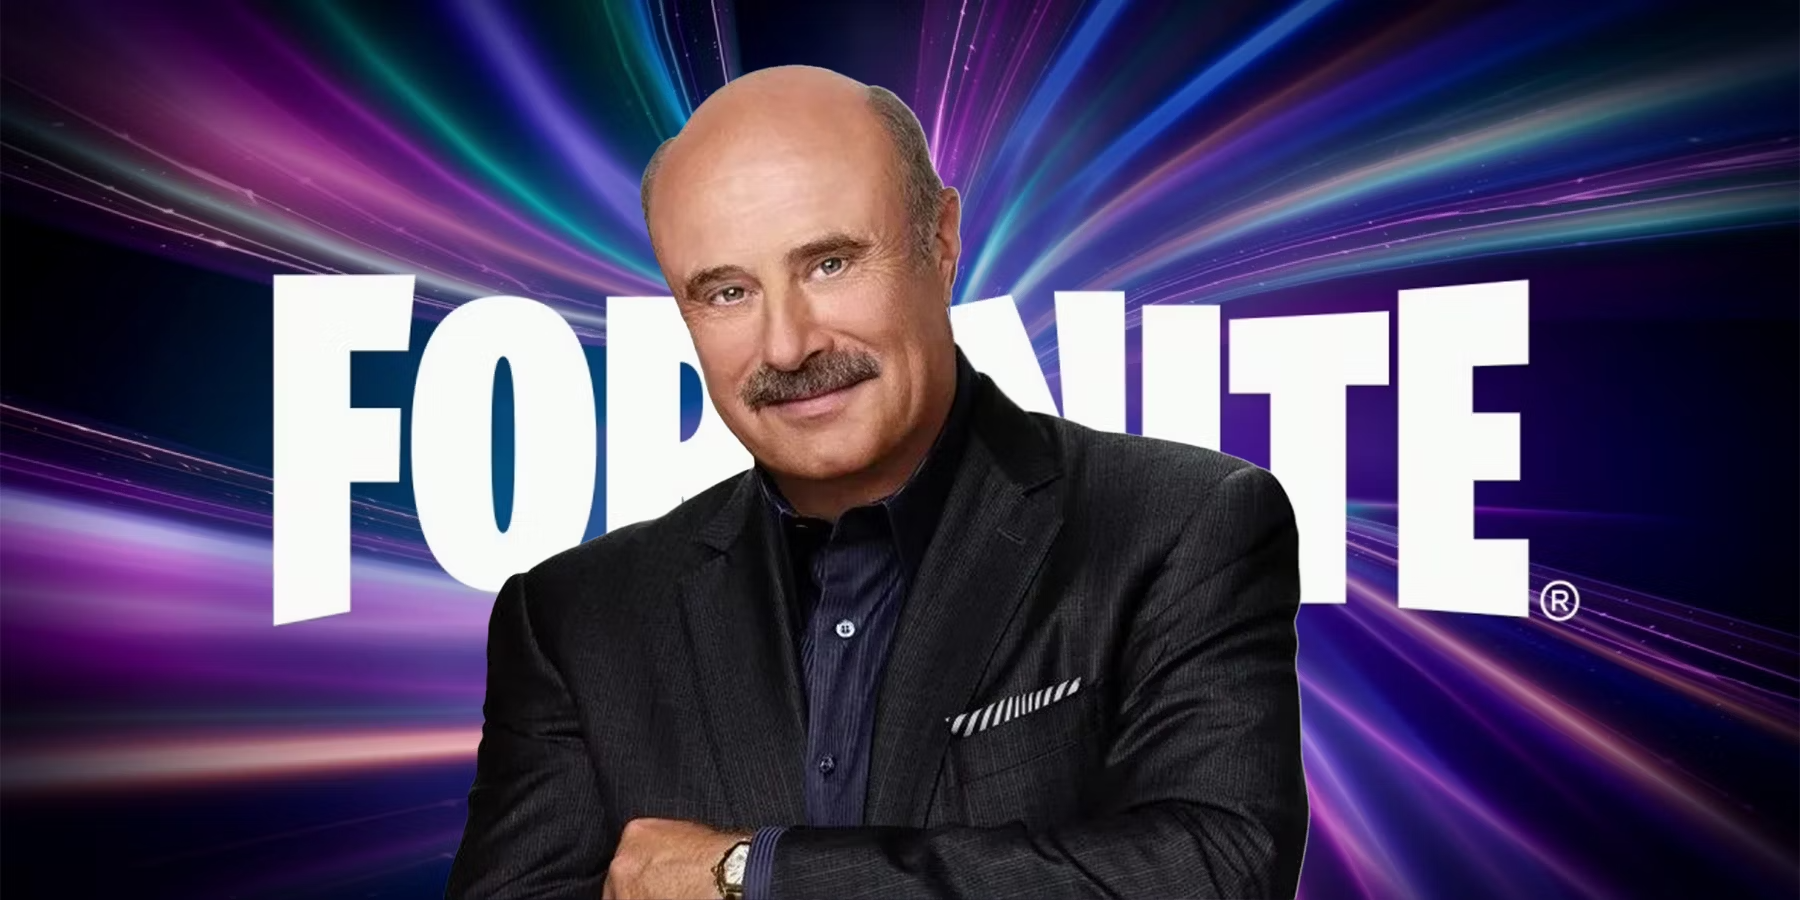 Is Dr Phil getting his skin in Fortnite?